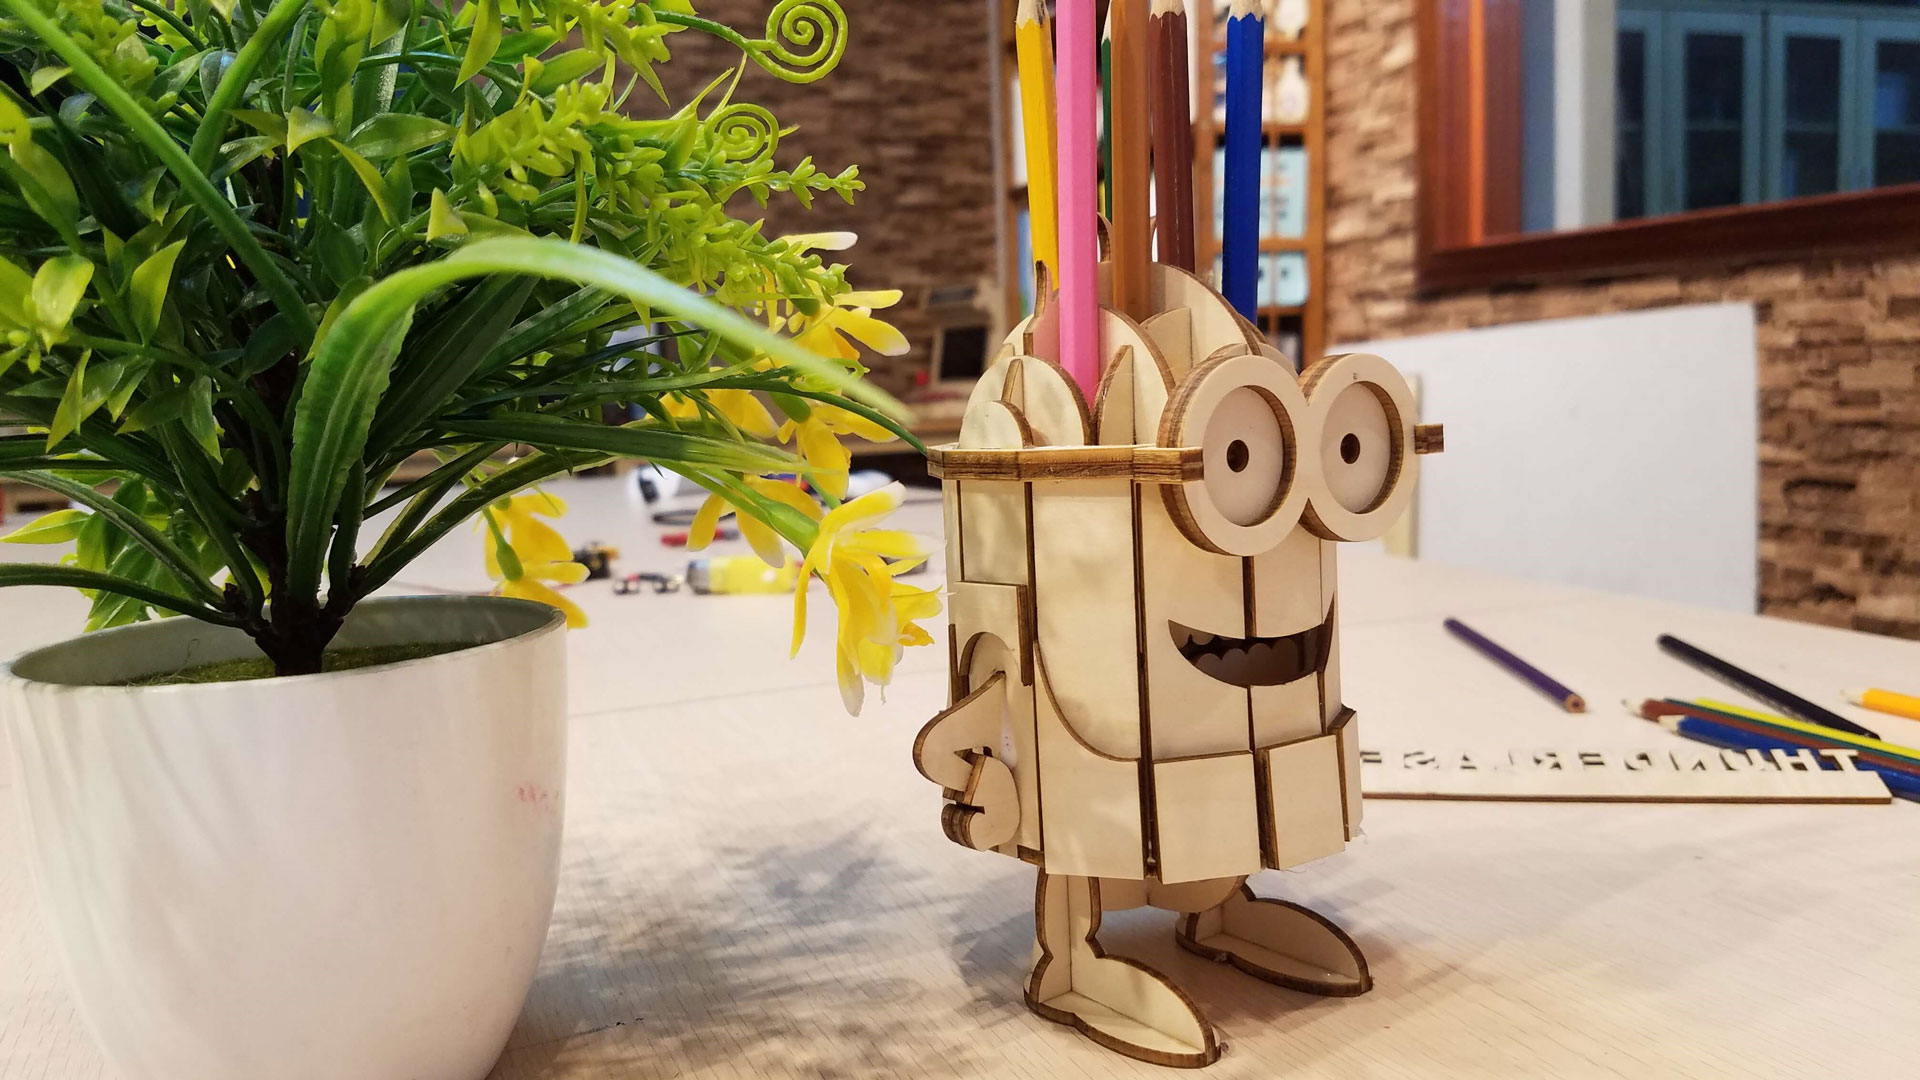 Laser Cut Minion Pencil Holder Craft For Kids Free Vector